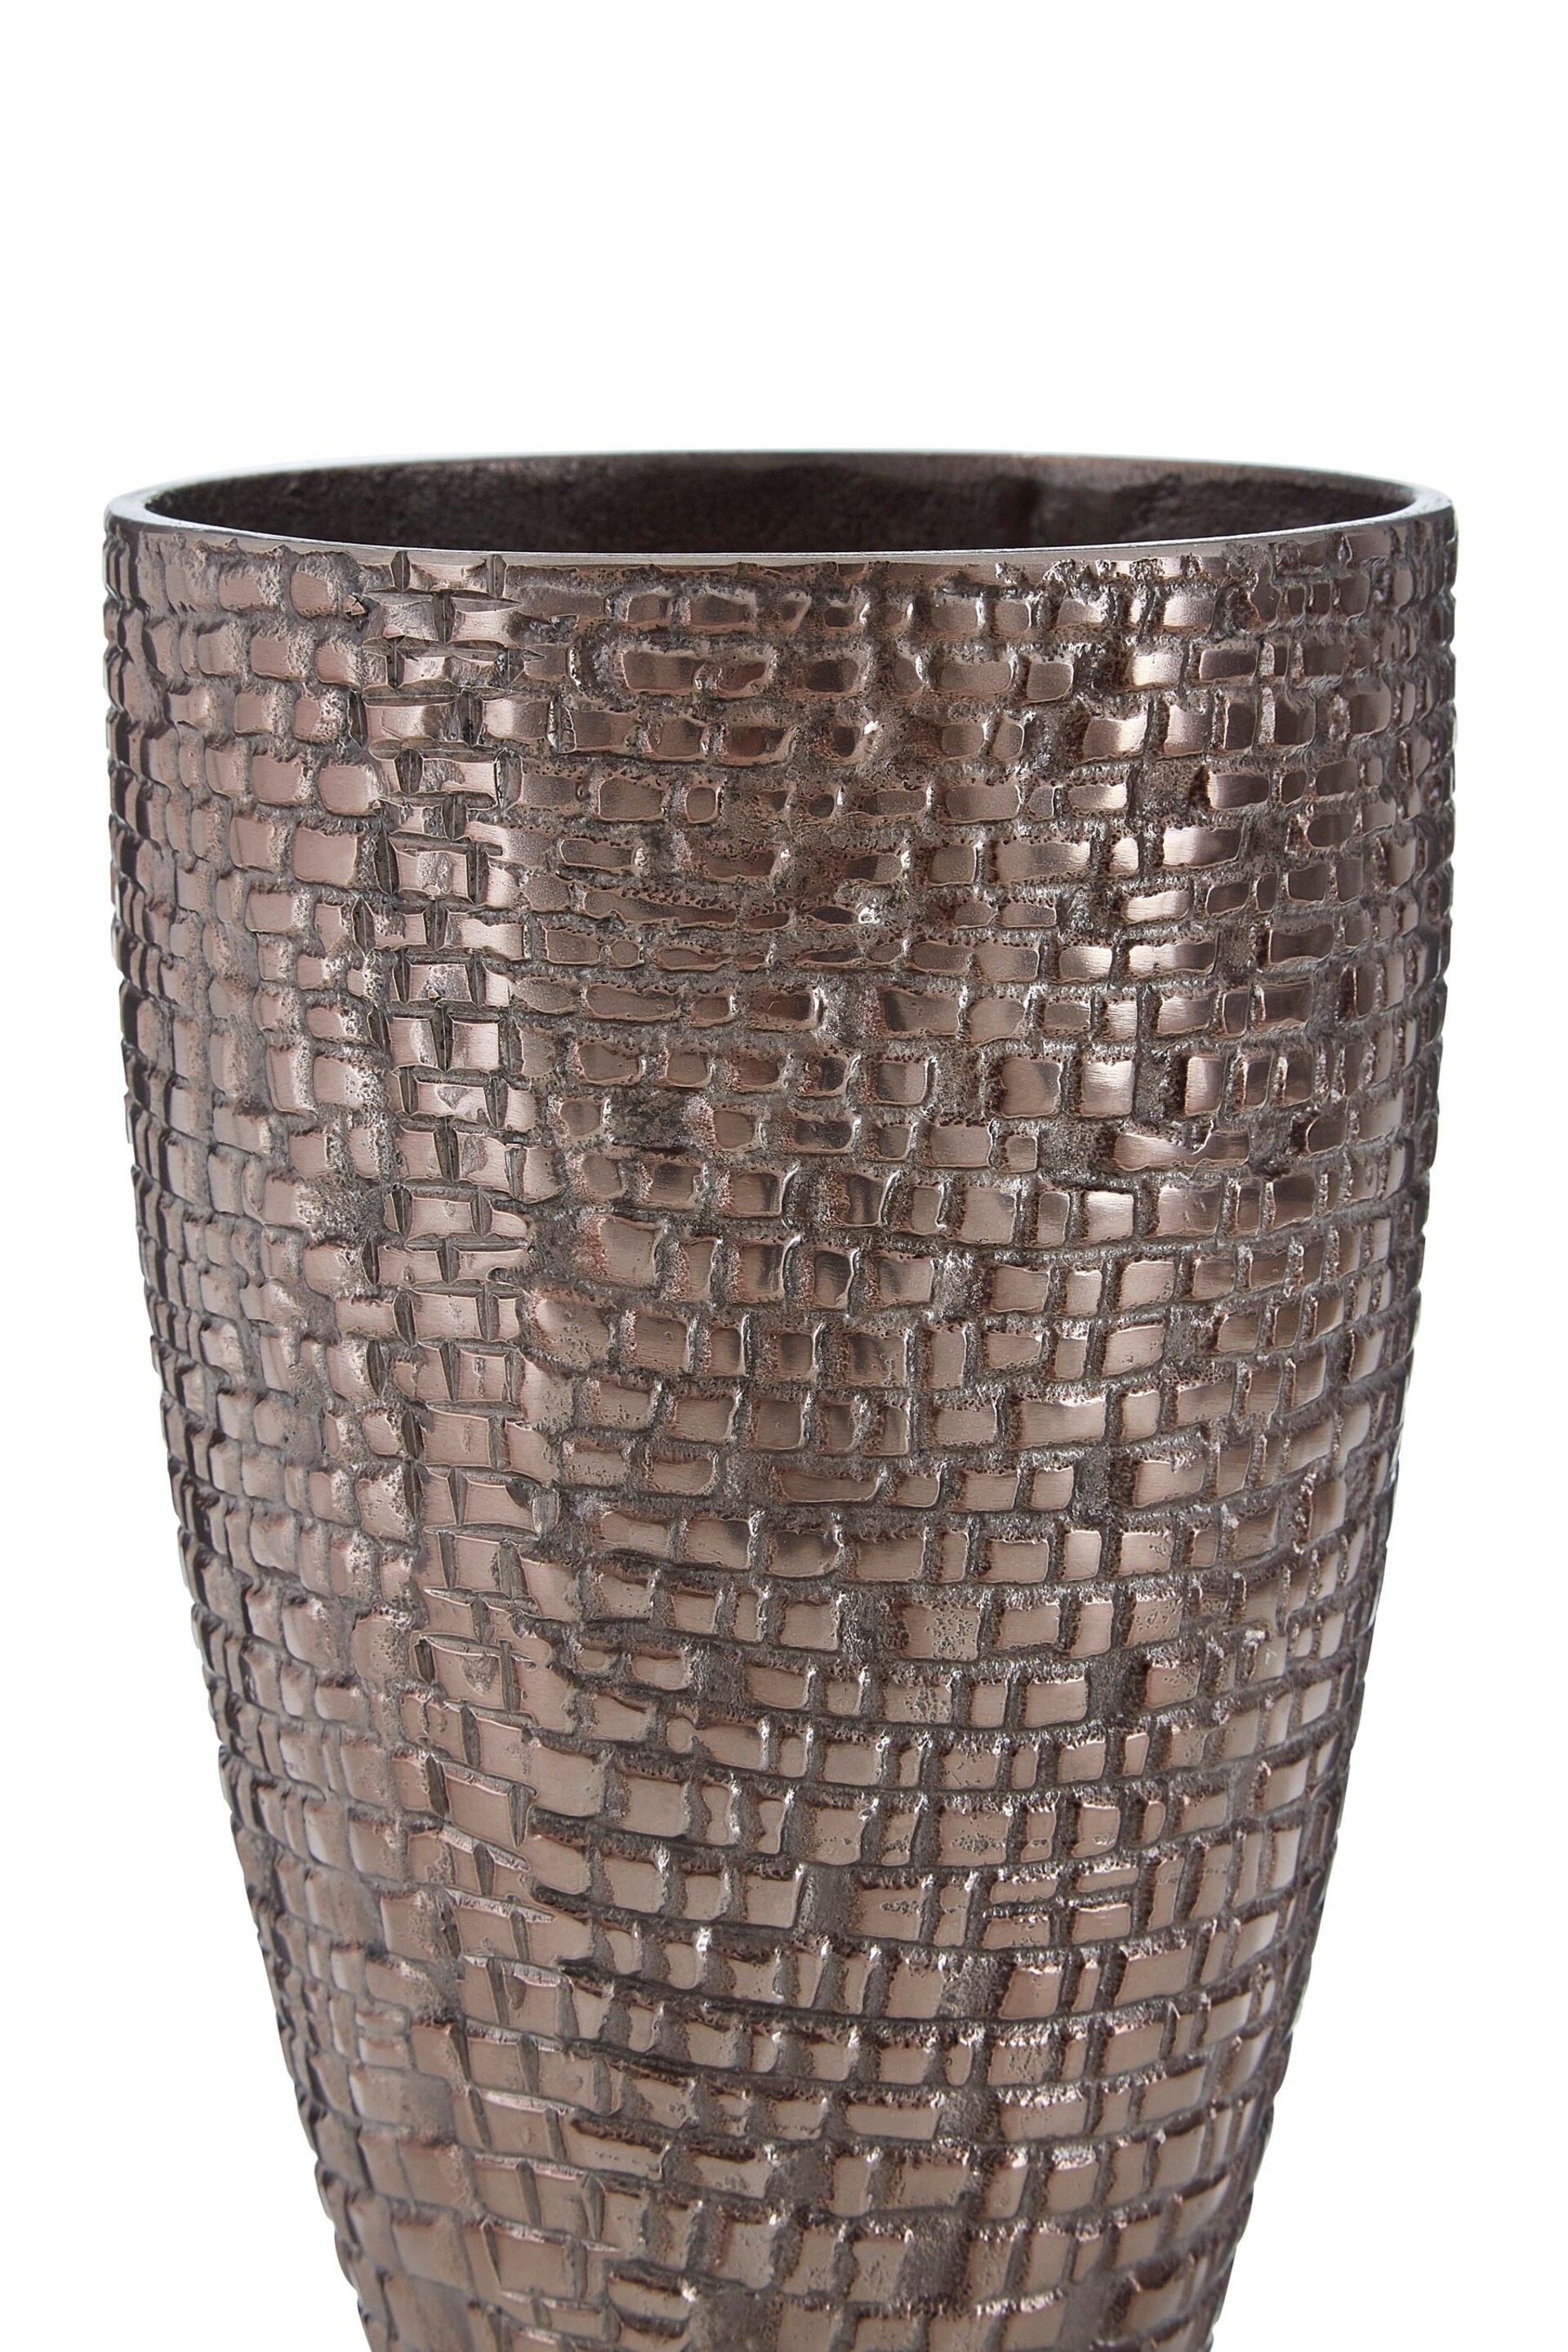 Fifty Five South Pewter Small Tile Textured Vase - Image 4 of 4